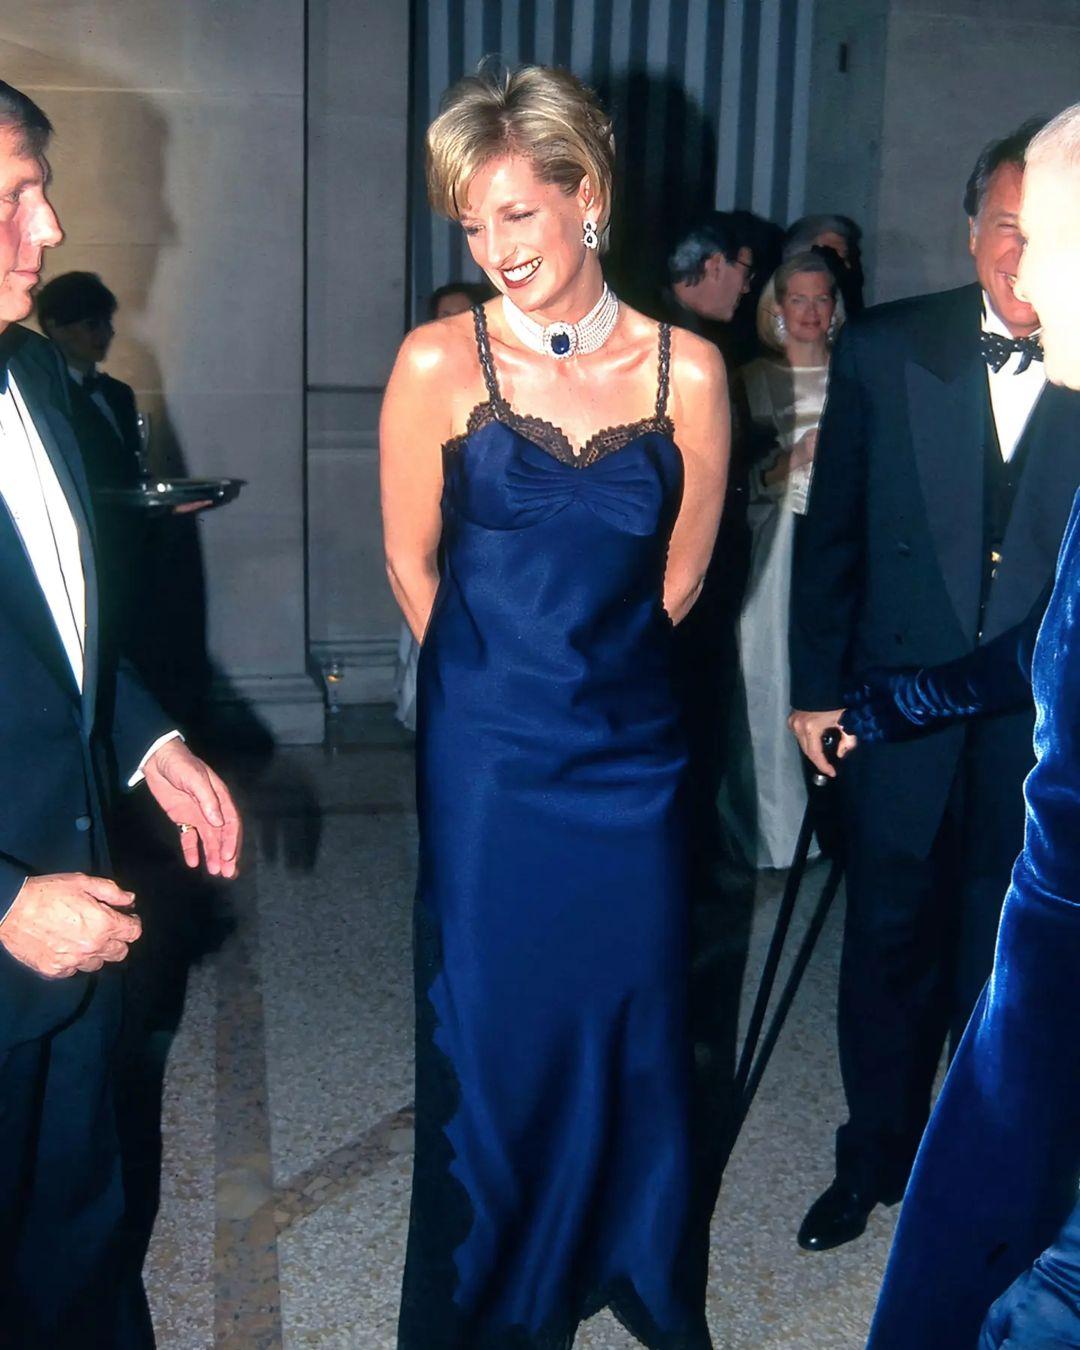 The 1996 Met paid tribute to the late fashion designer Christian Dior, with whom the Princess of Wales had a friendly relationship. (Pic/@Metgalaofficial_)